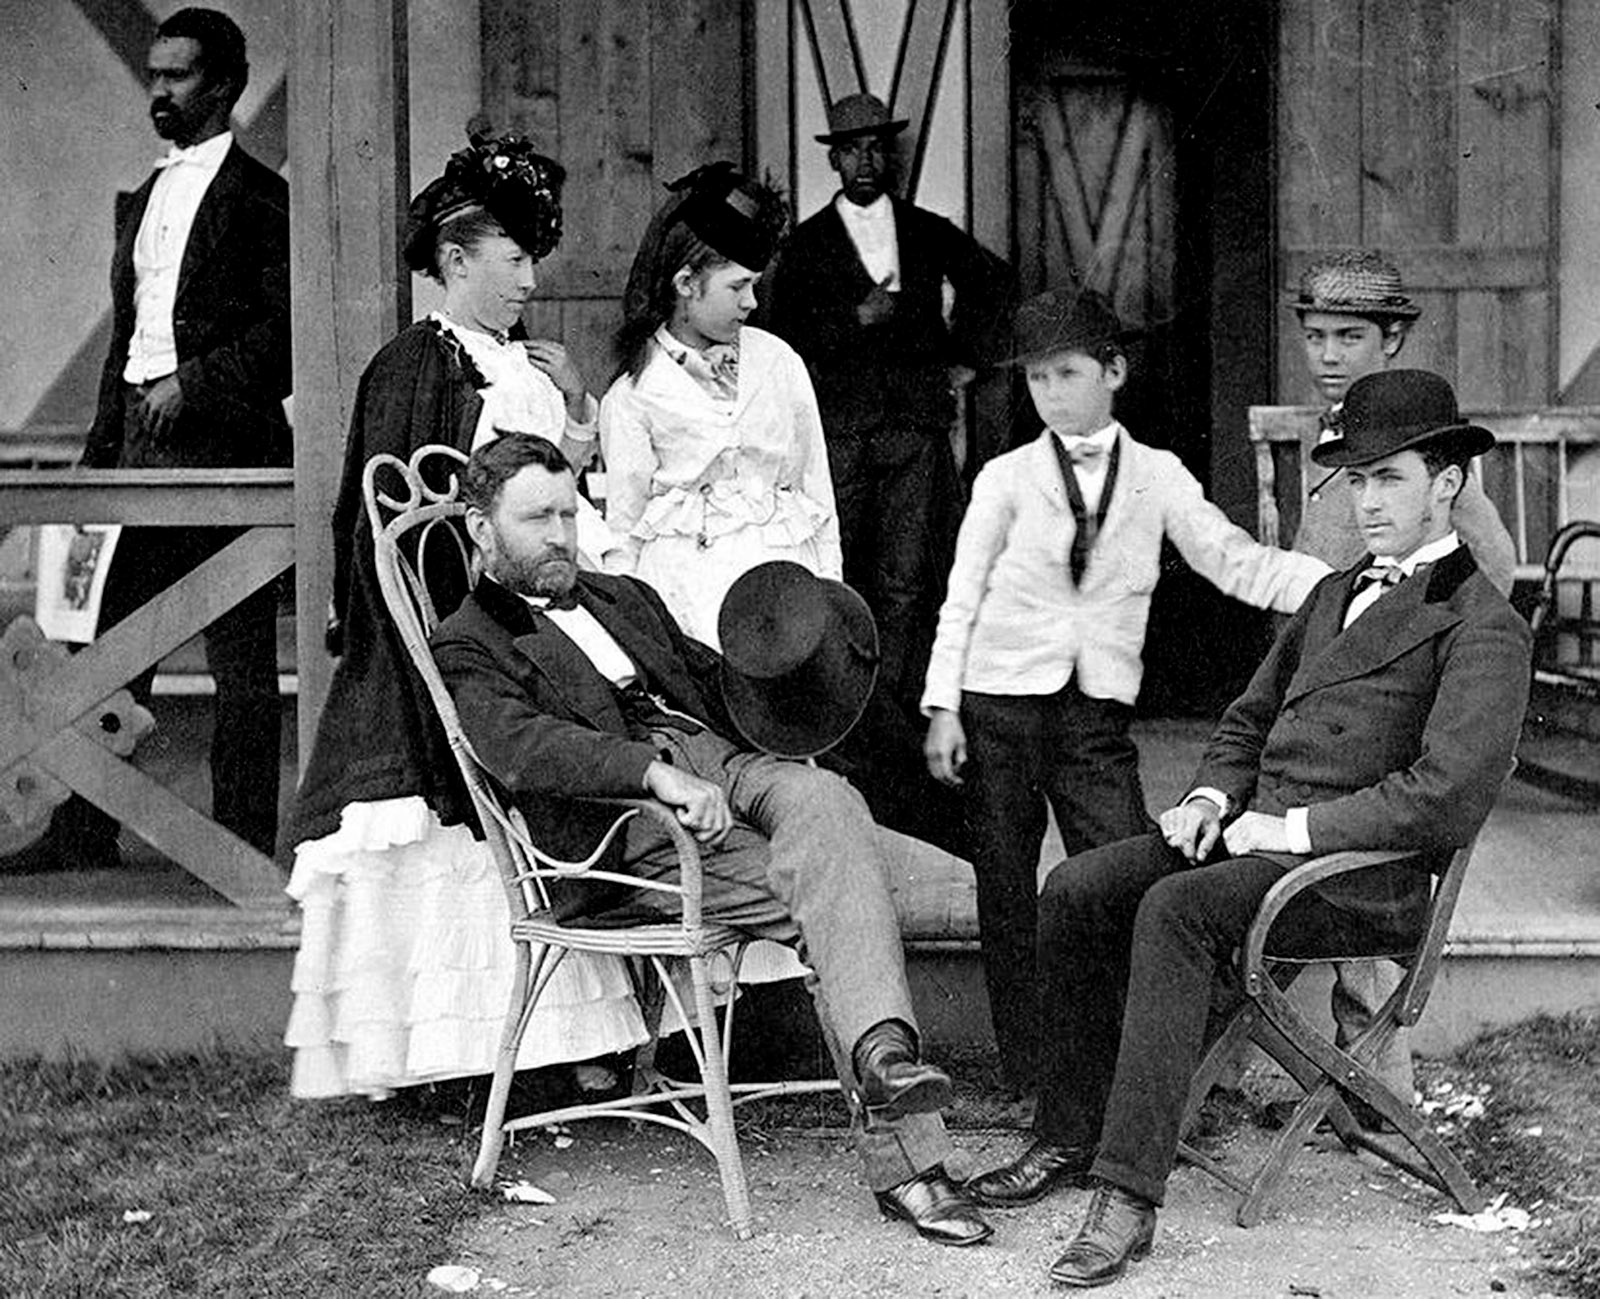 Ulysses S. Grant and his family, Long Branch, New Jersey, 1870